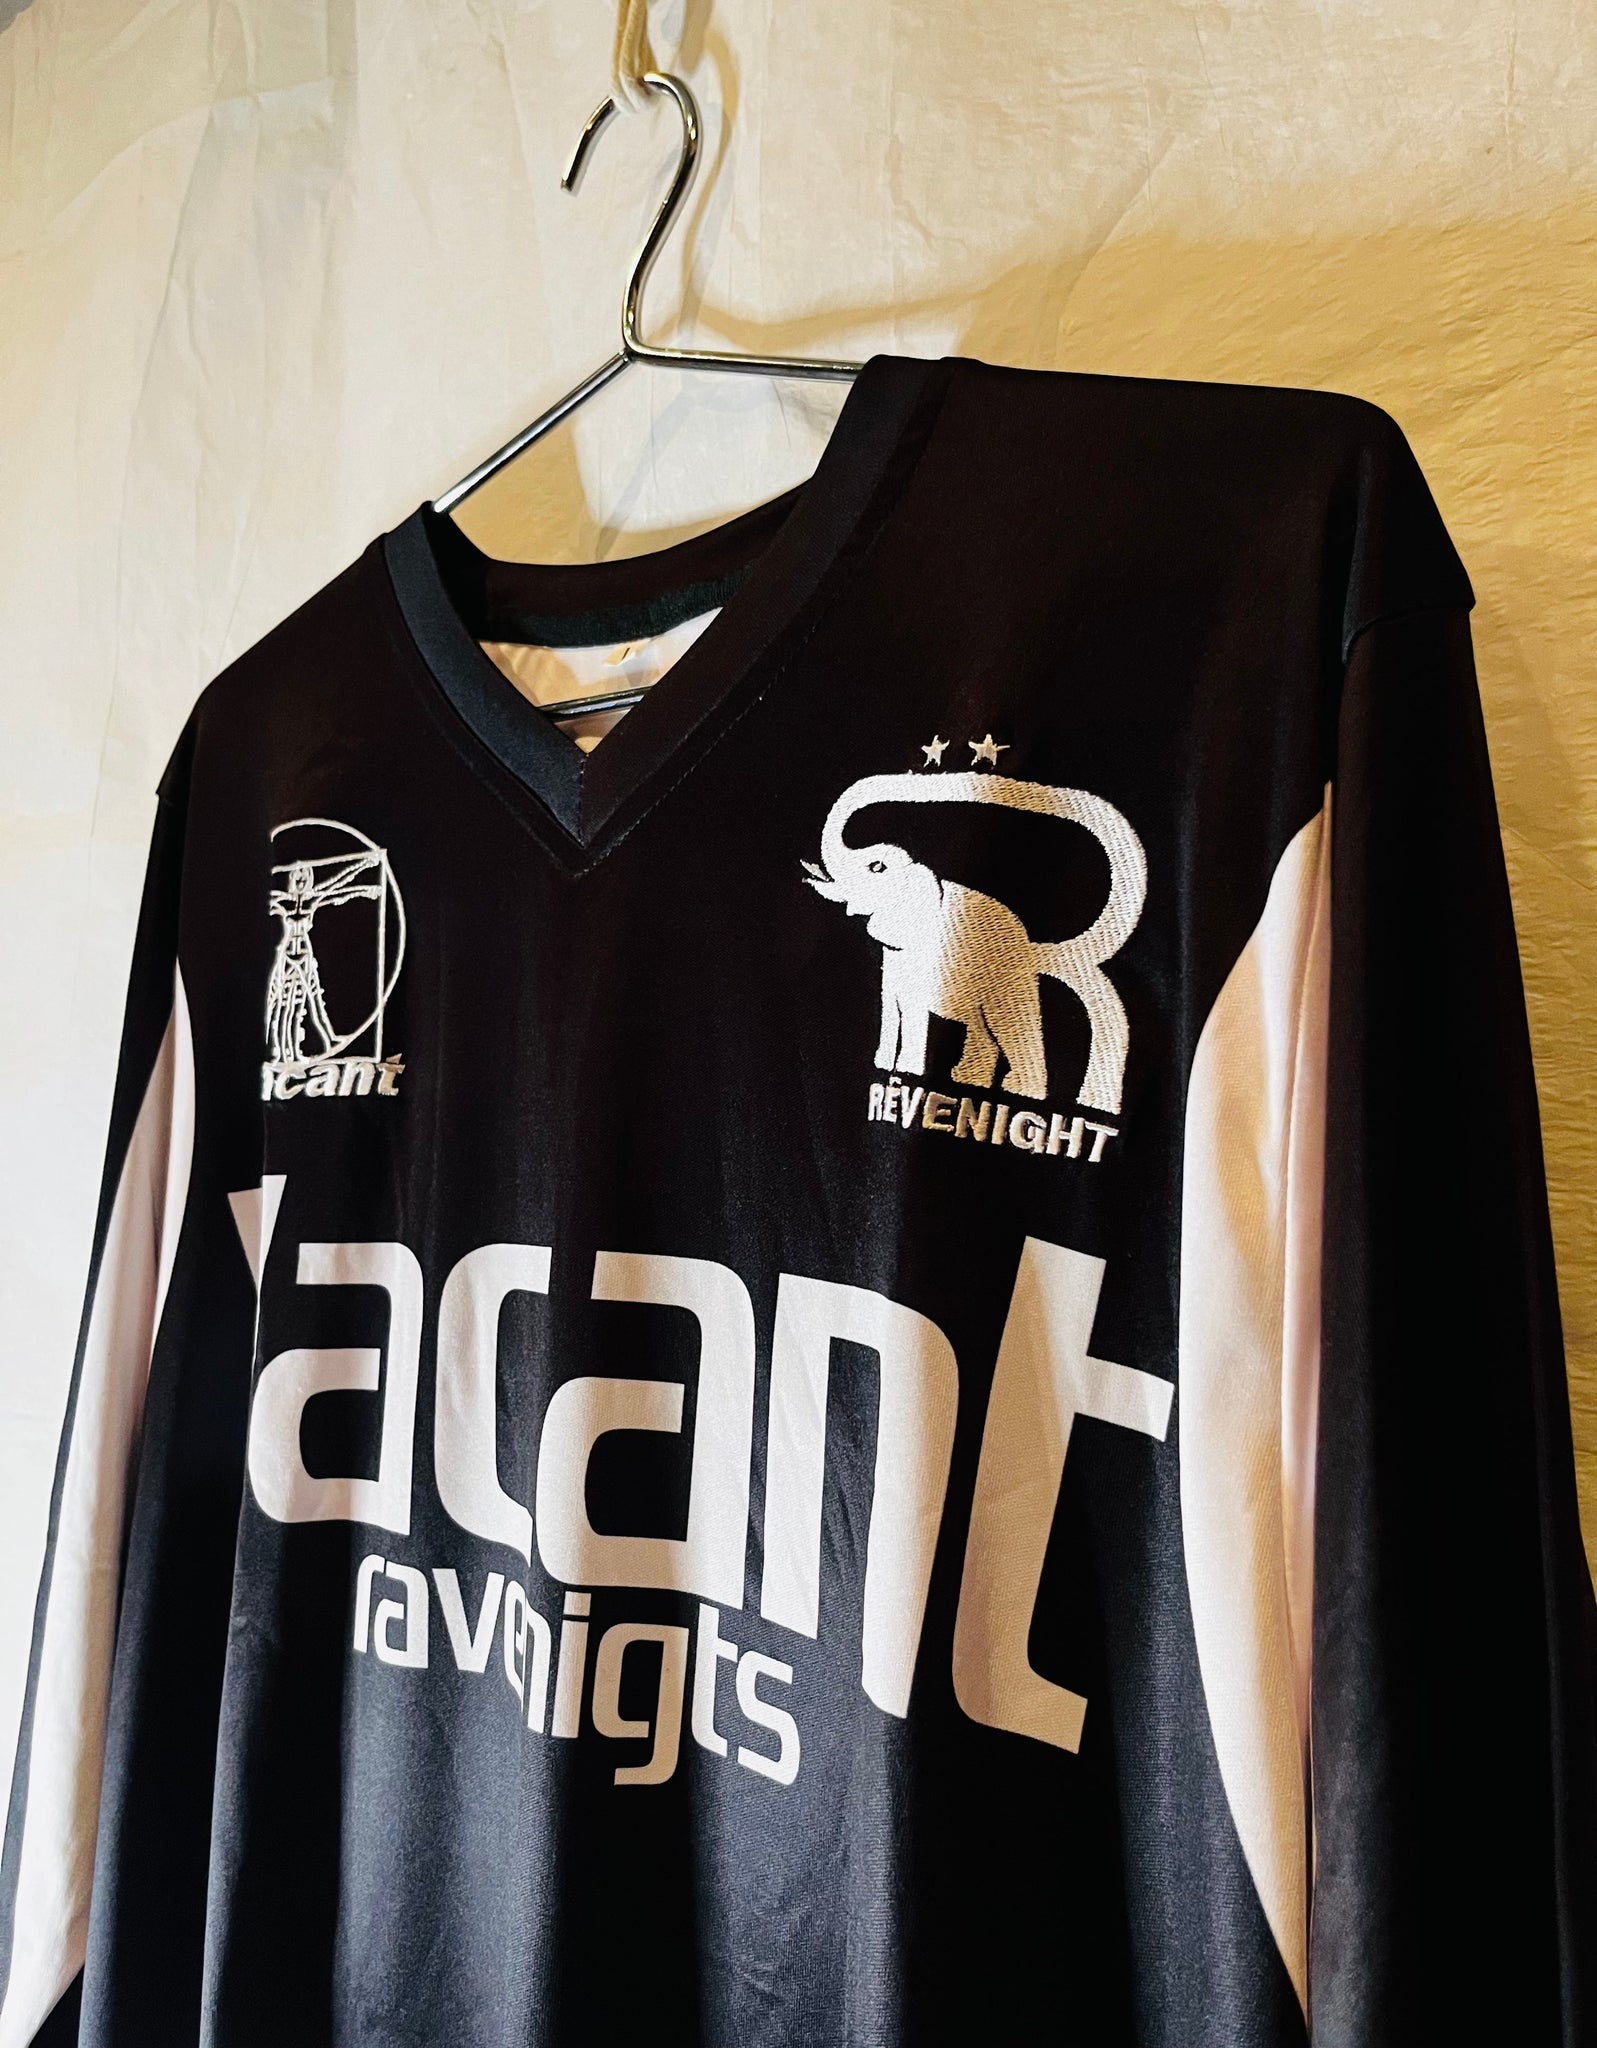 VCNTNGHTS JERSEY